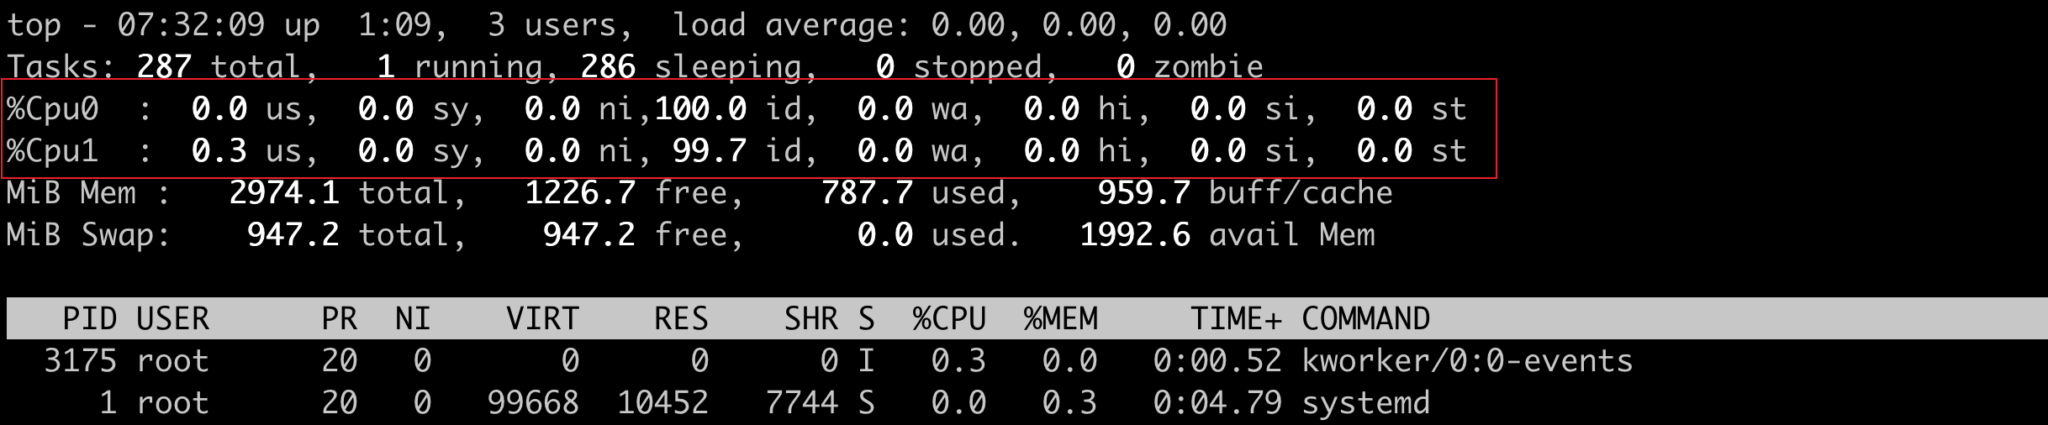 monitor cpu and memory usage in linux